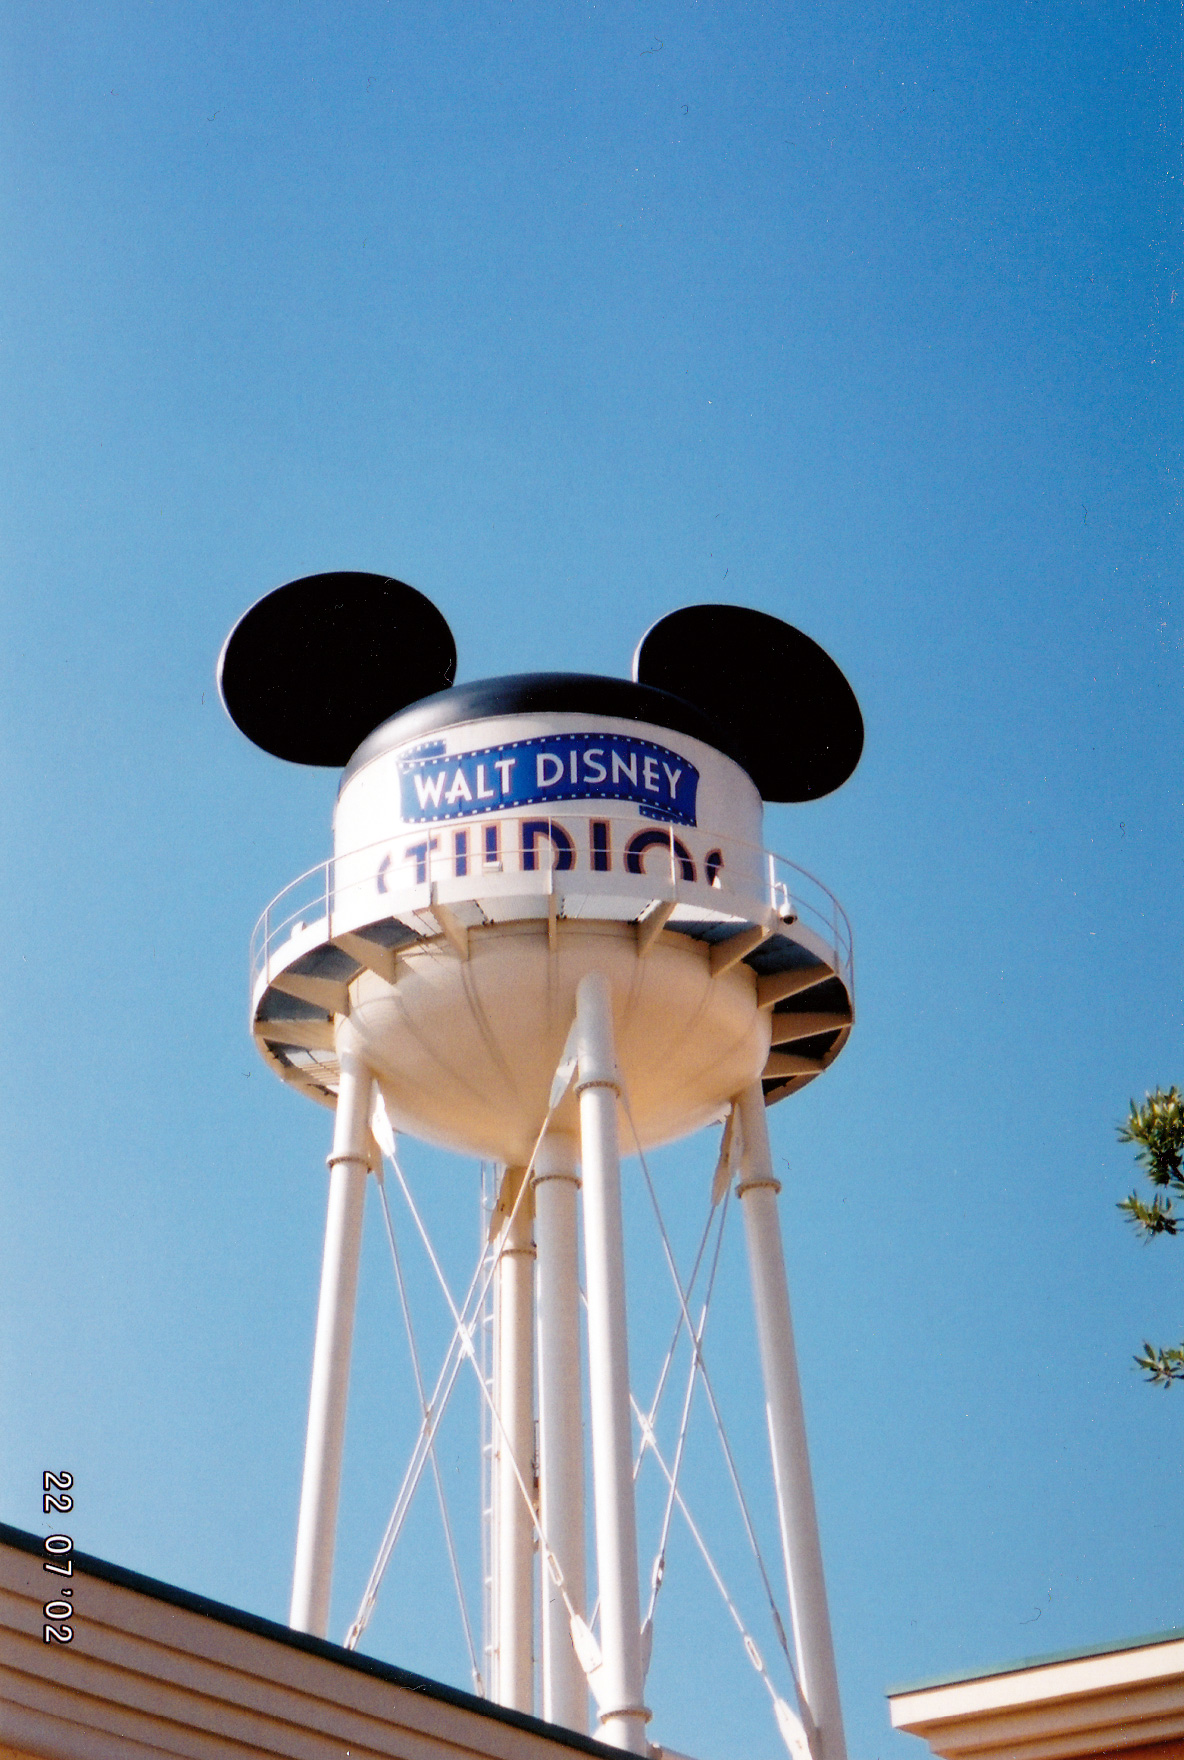 Photos from Yesteryear: DLP in 2002 – Dedicated To DLP